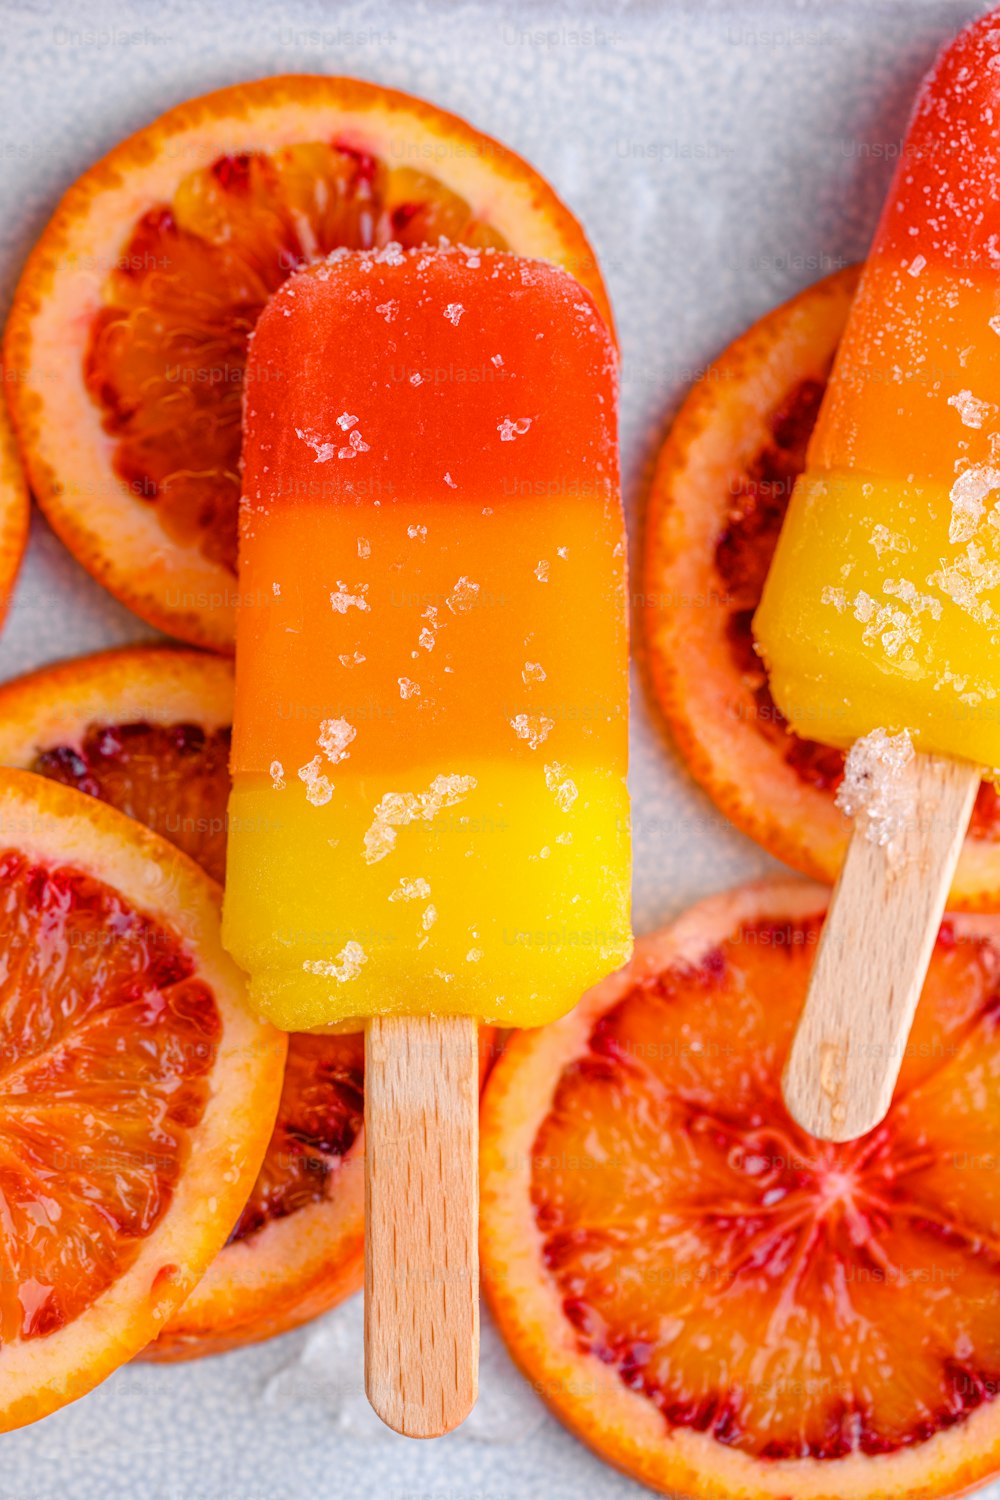 a close up of a popsicle with orange slices